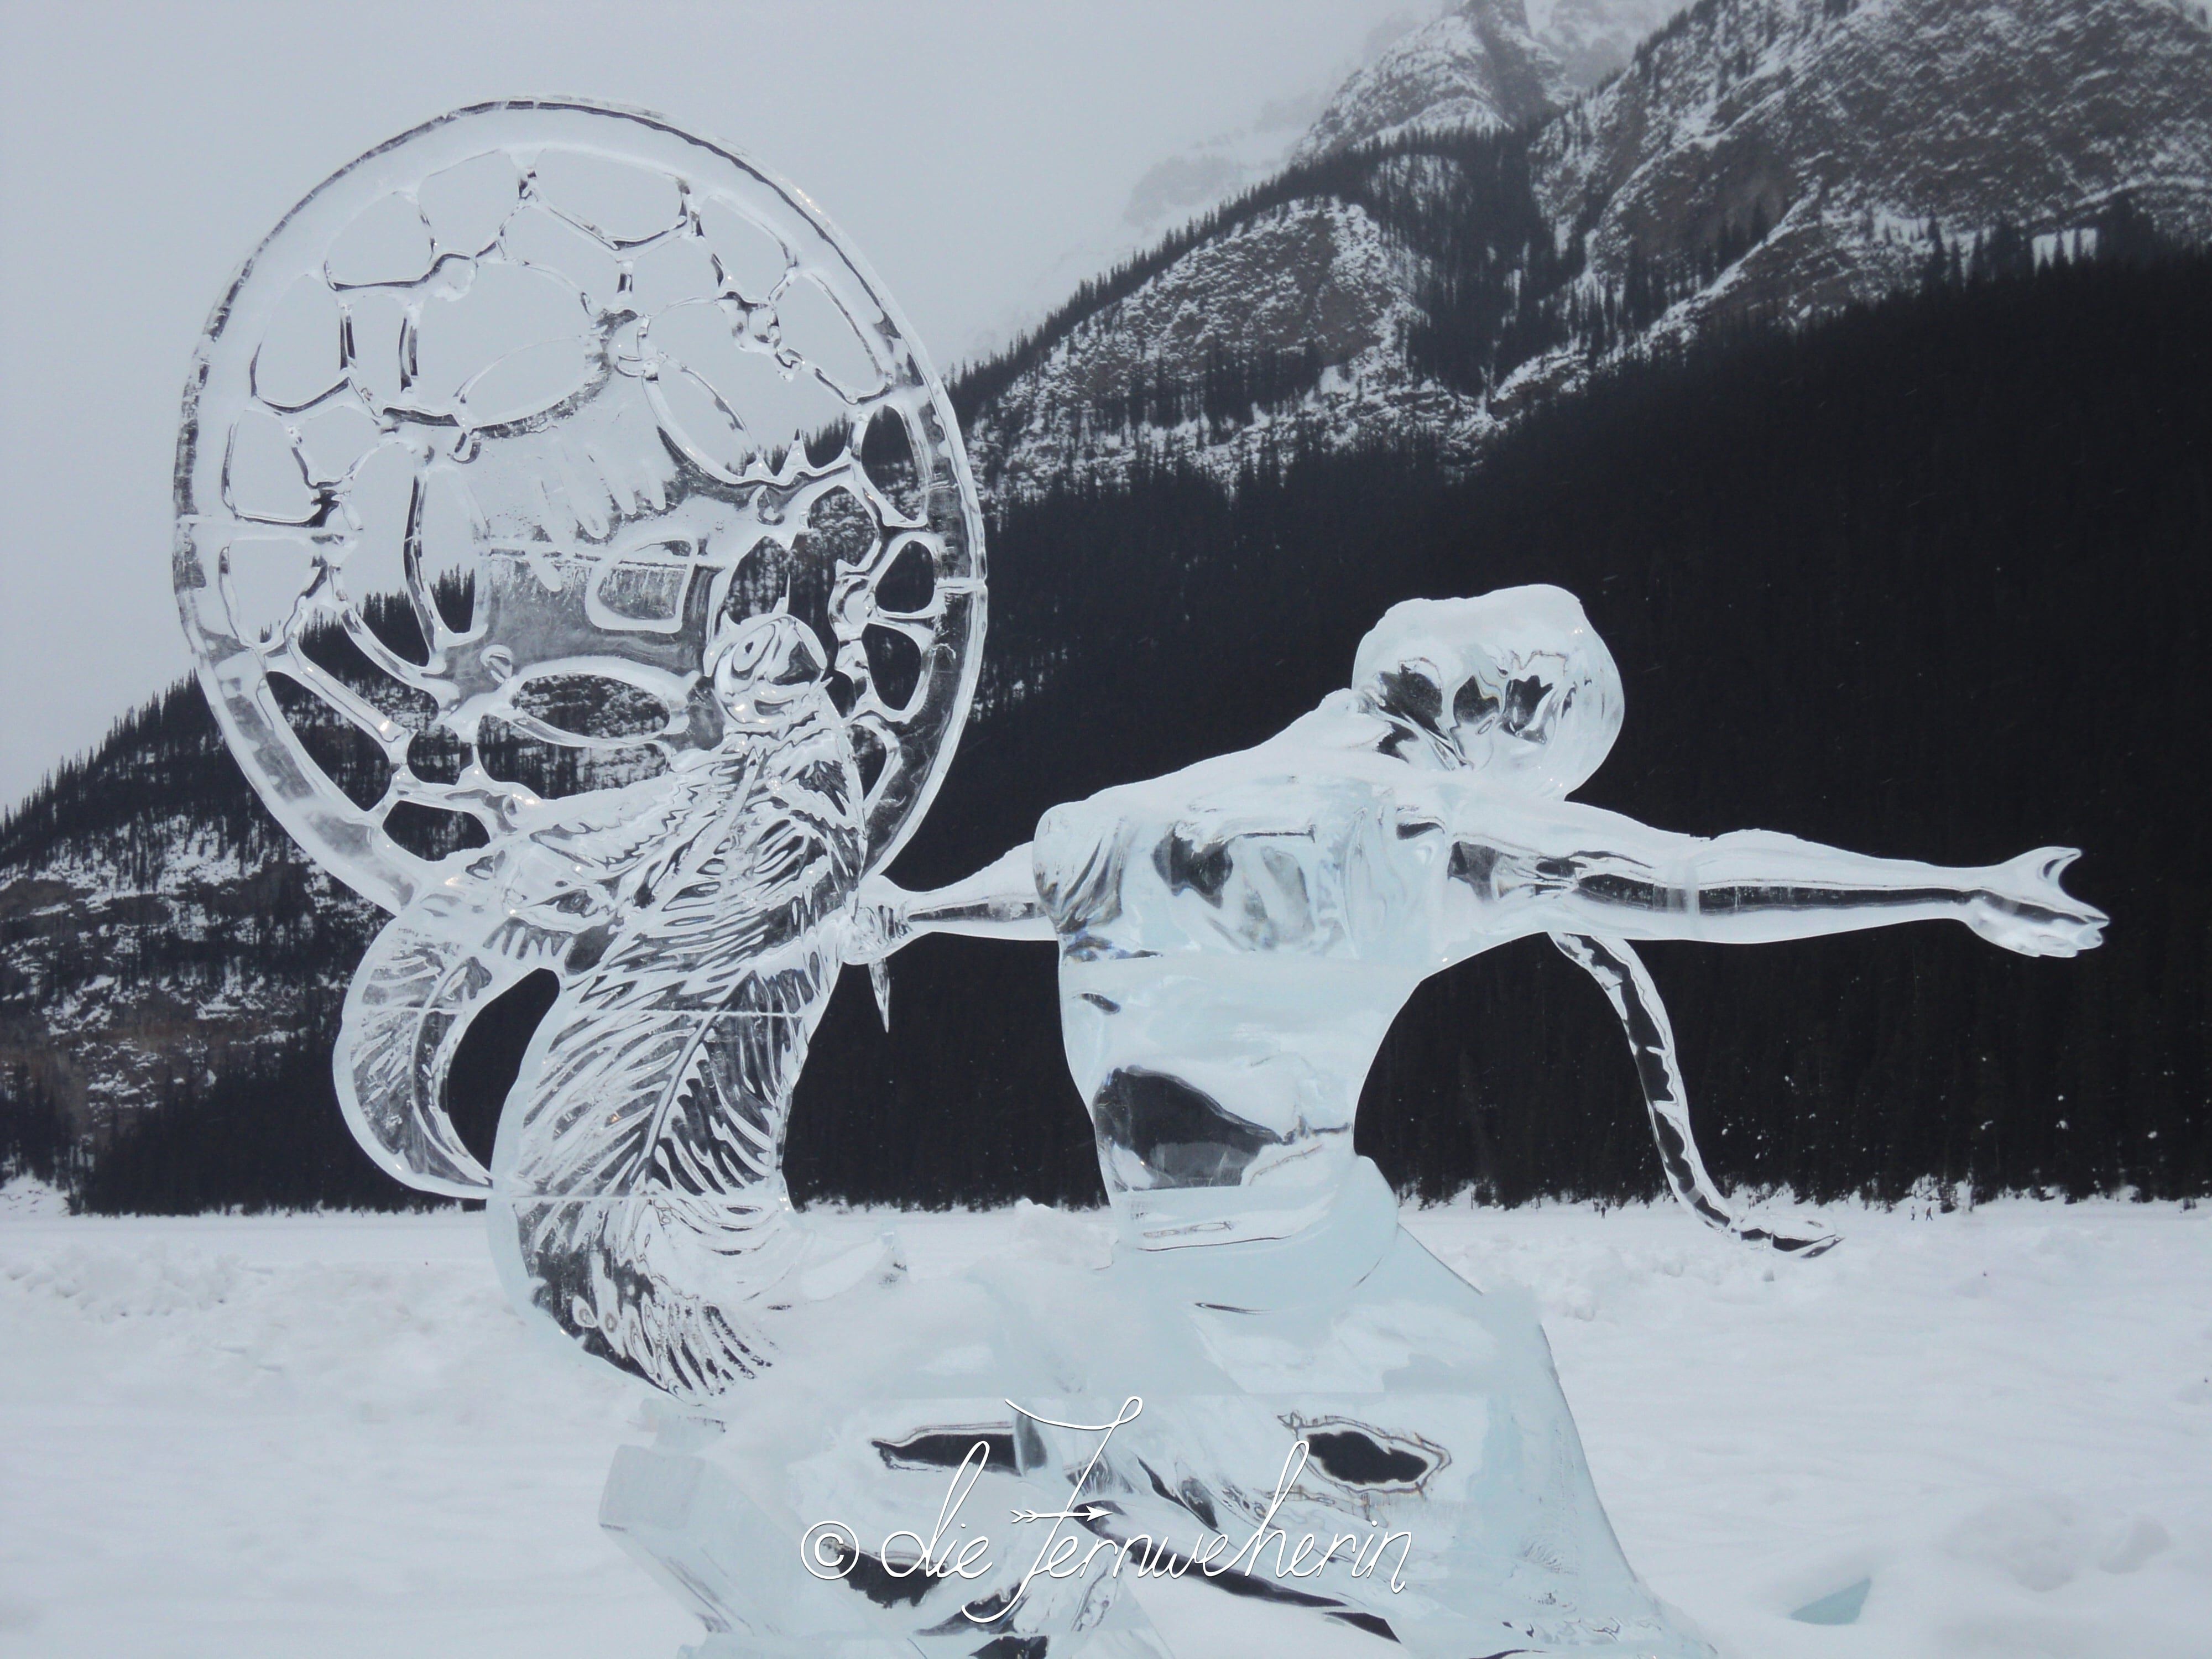 An ice sculpture of a Native American woman on the grounds of the Fairmont Château Lake Louise in Banff National Park.